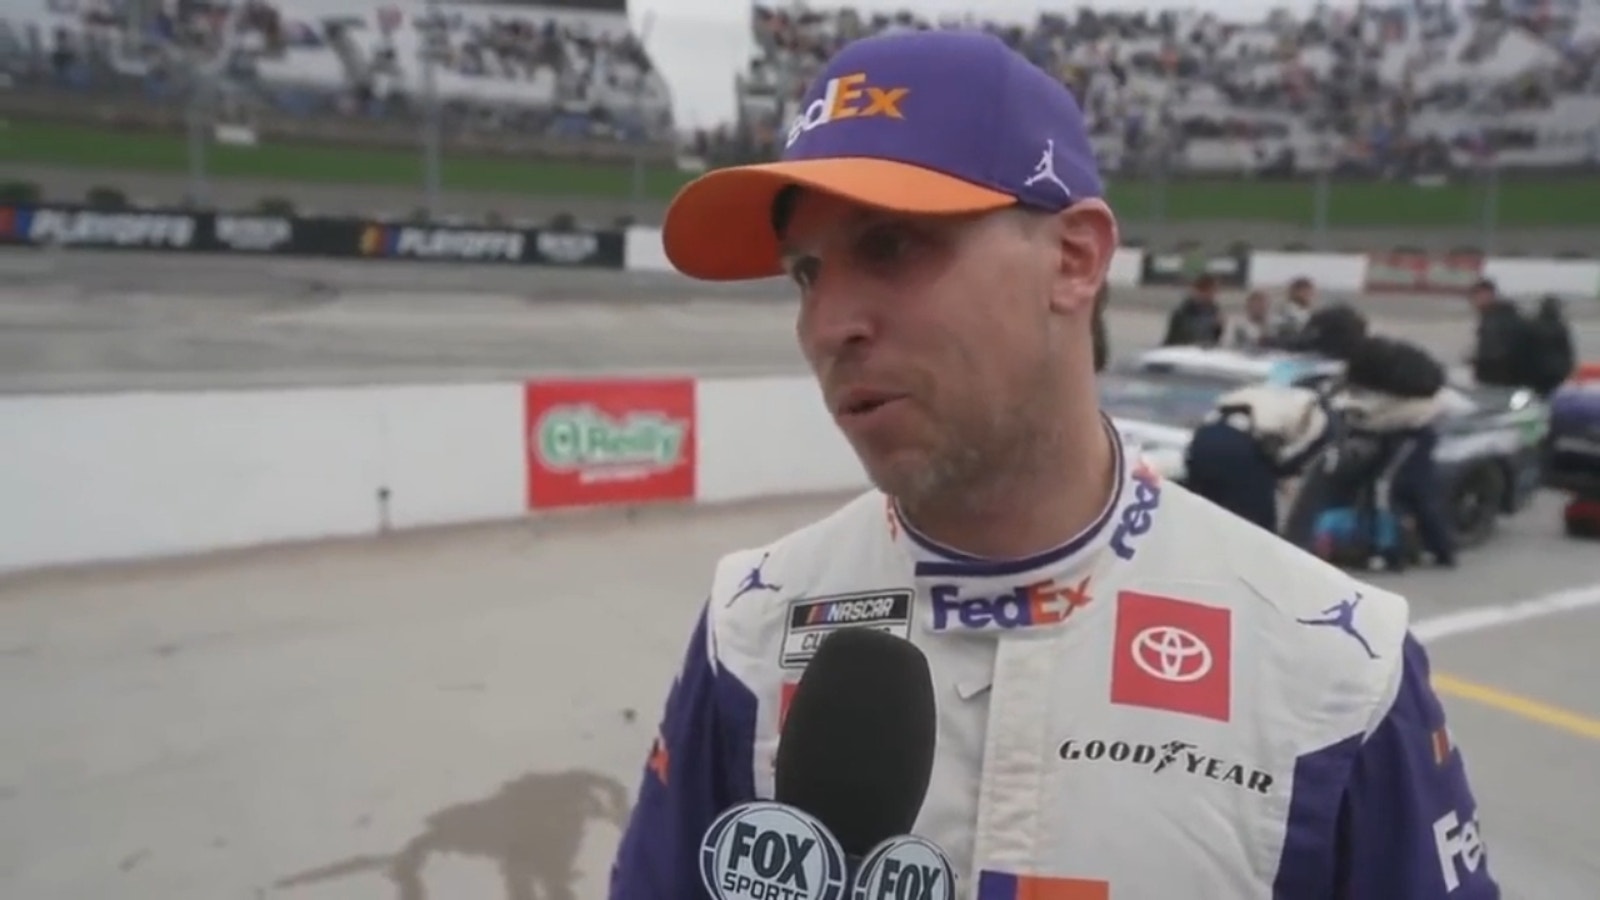 Hamlin was eliminated after Chastain's wild move